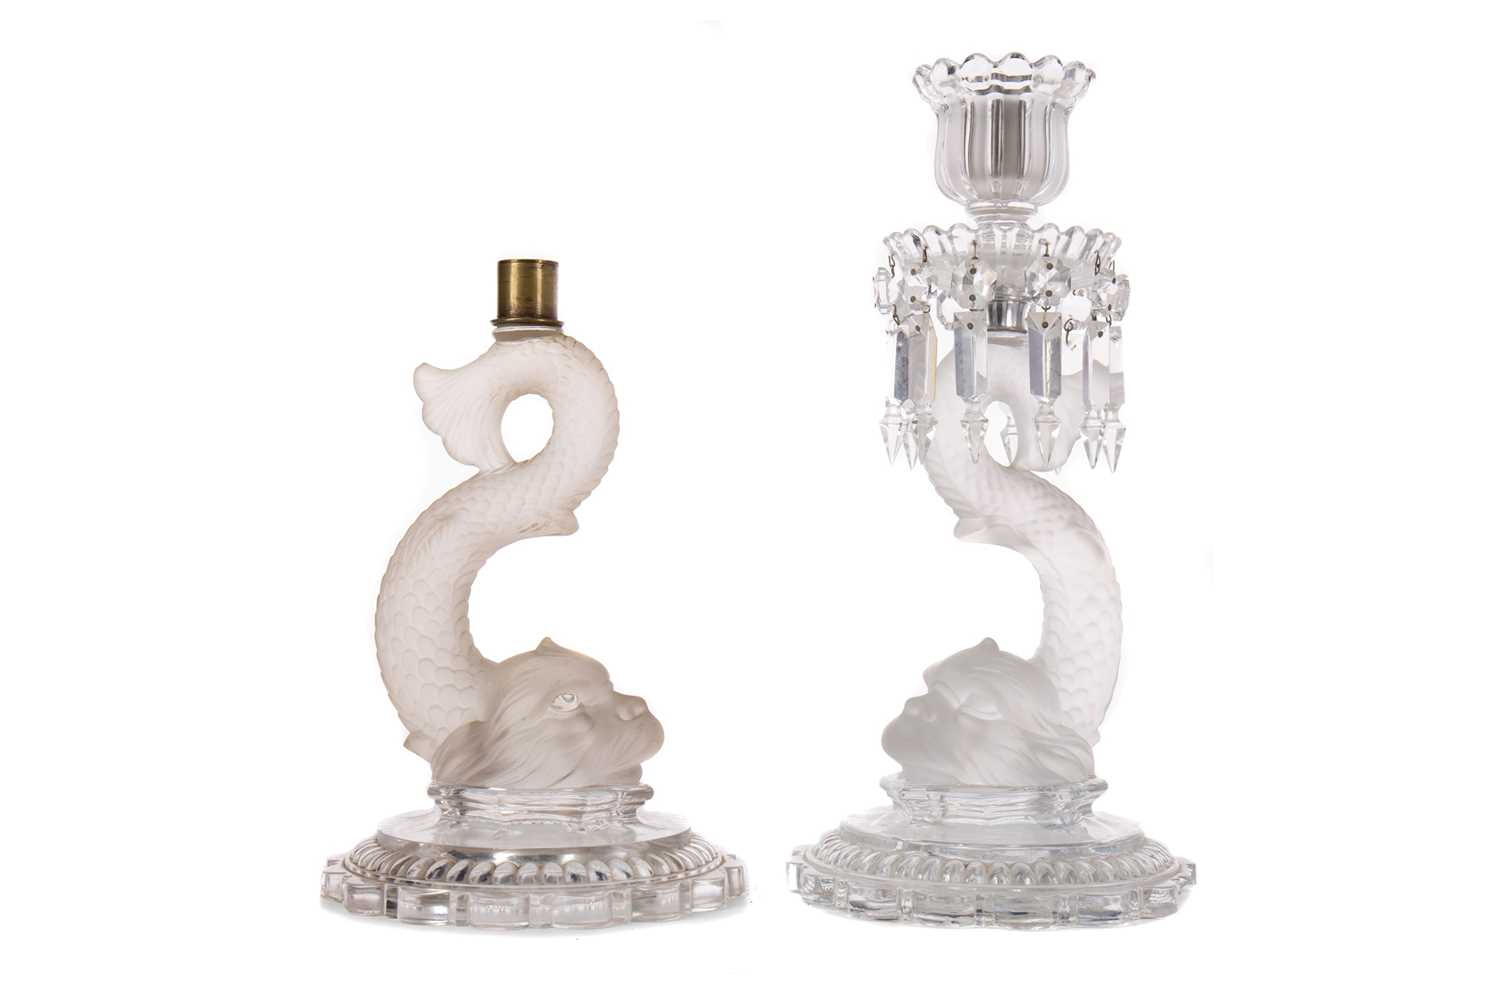 Lot 1125 - A PAIR OF BACCARAT CANDLESTICKS